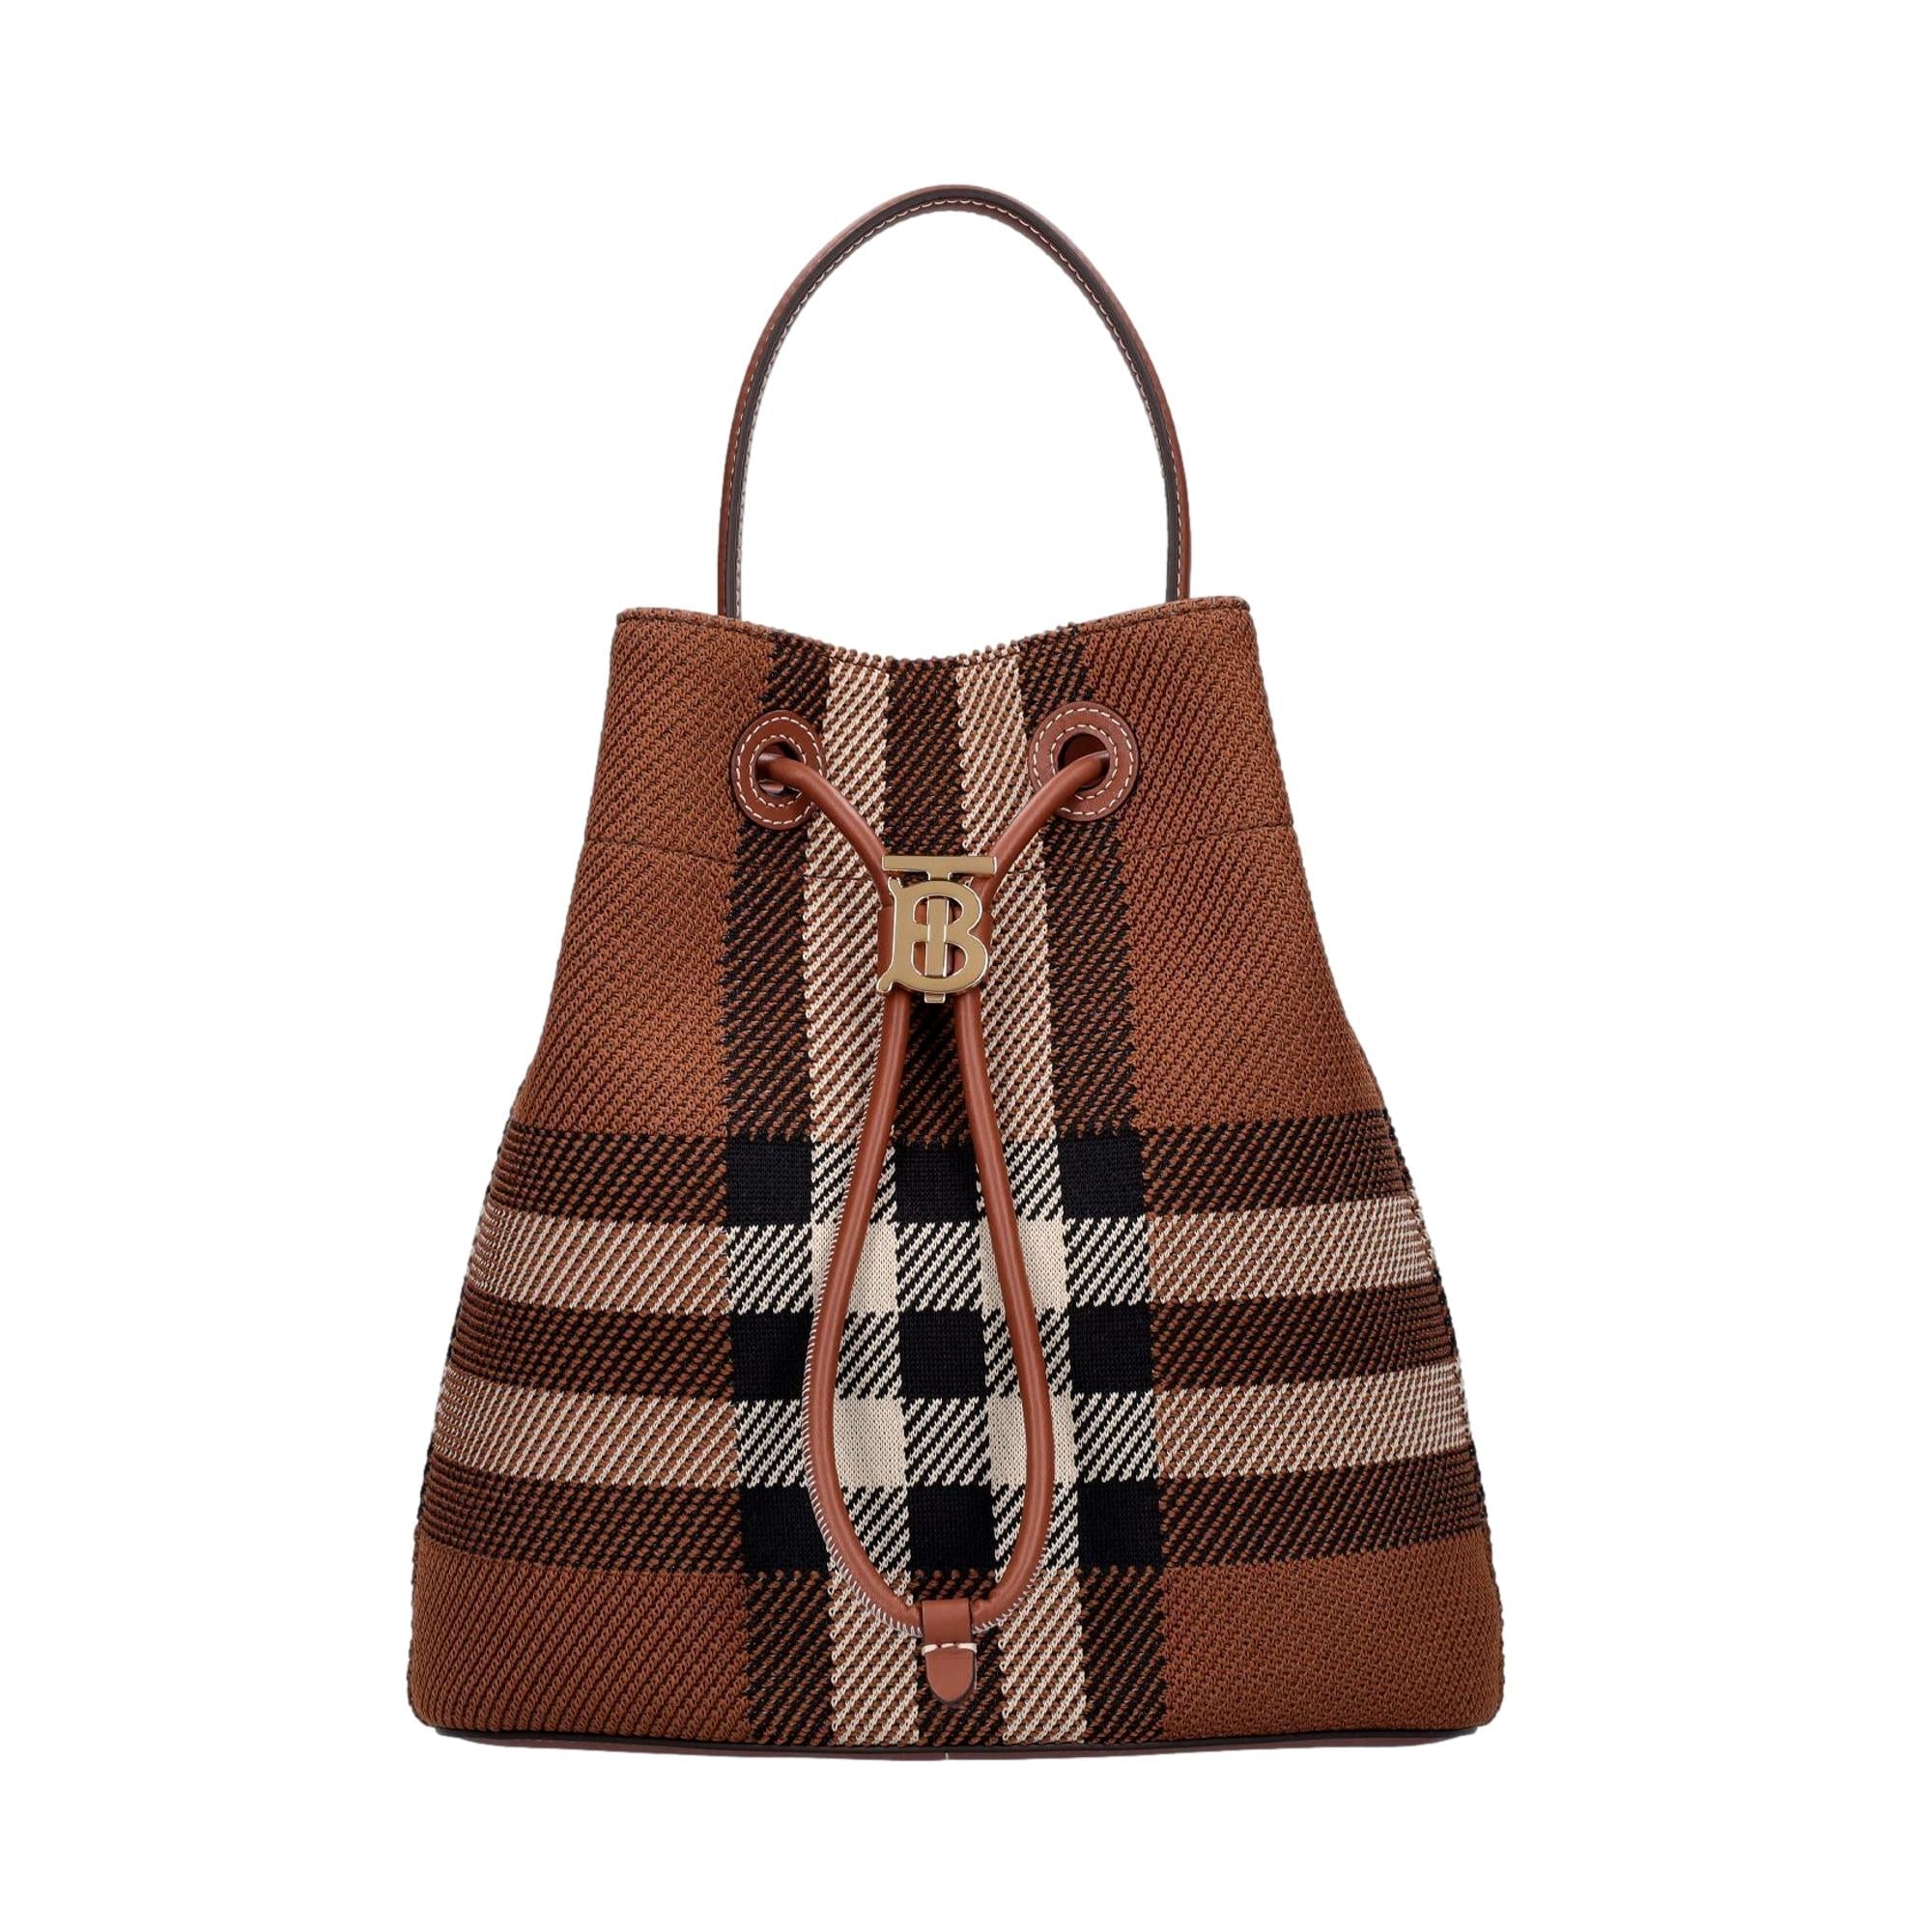 Burberry TB Dark Birch Knitted Check and Leather Small Drawstring Bucket Bag